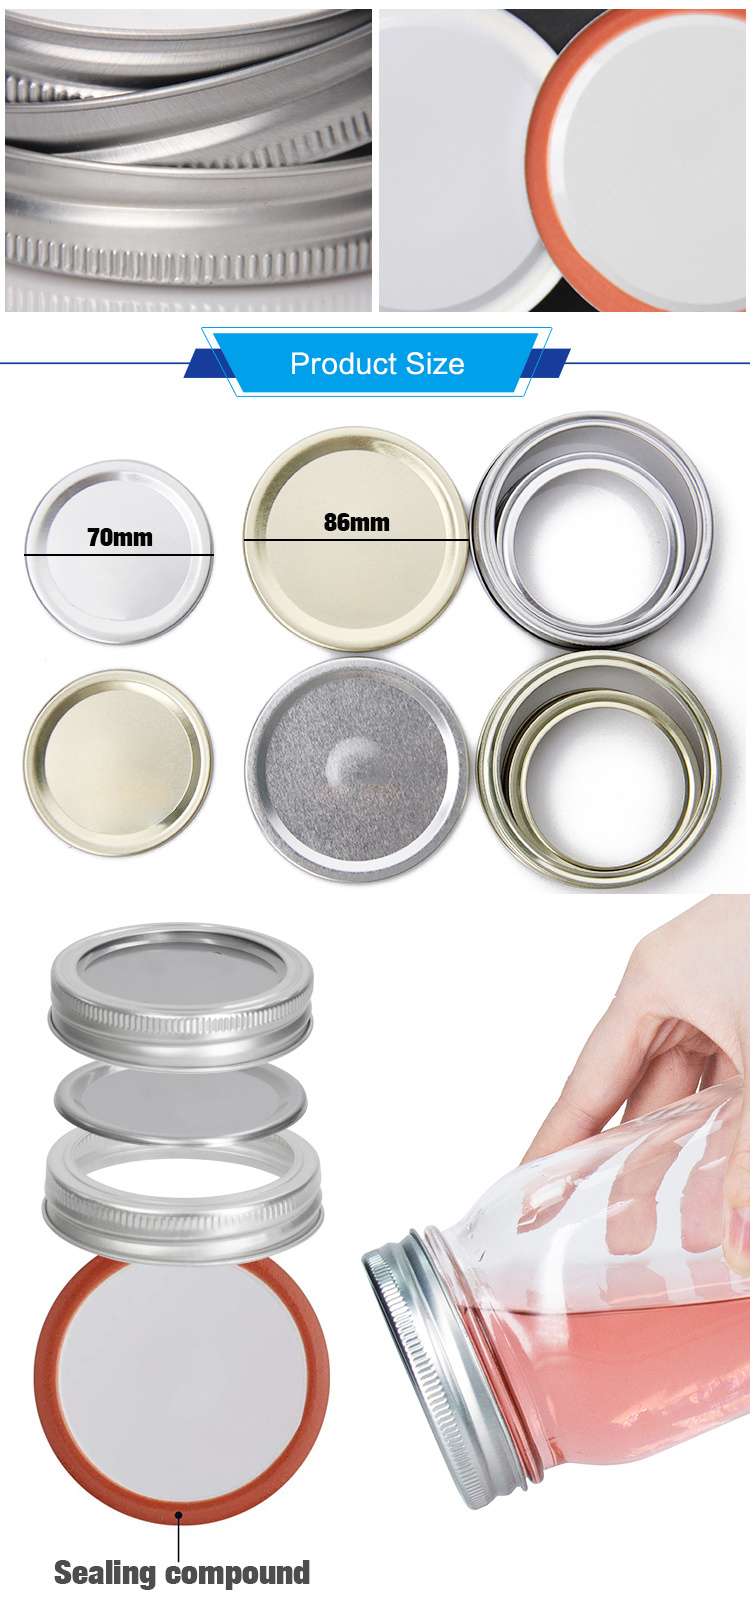 Wholesale 70 mm Separate Canning Mason Jar Tinplate Screw Lid for Home Canning